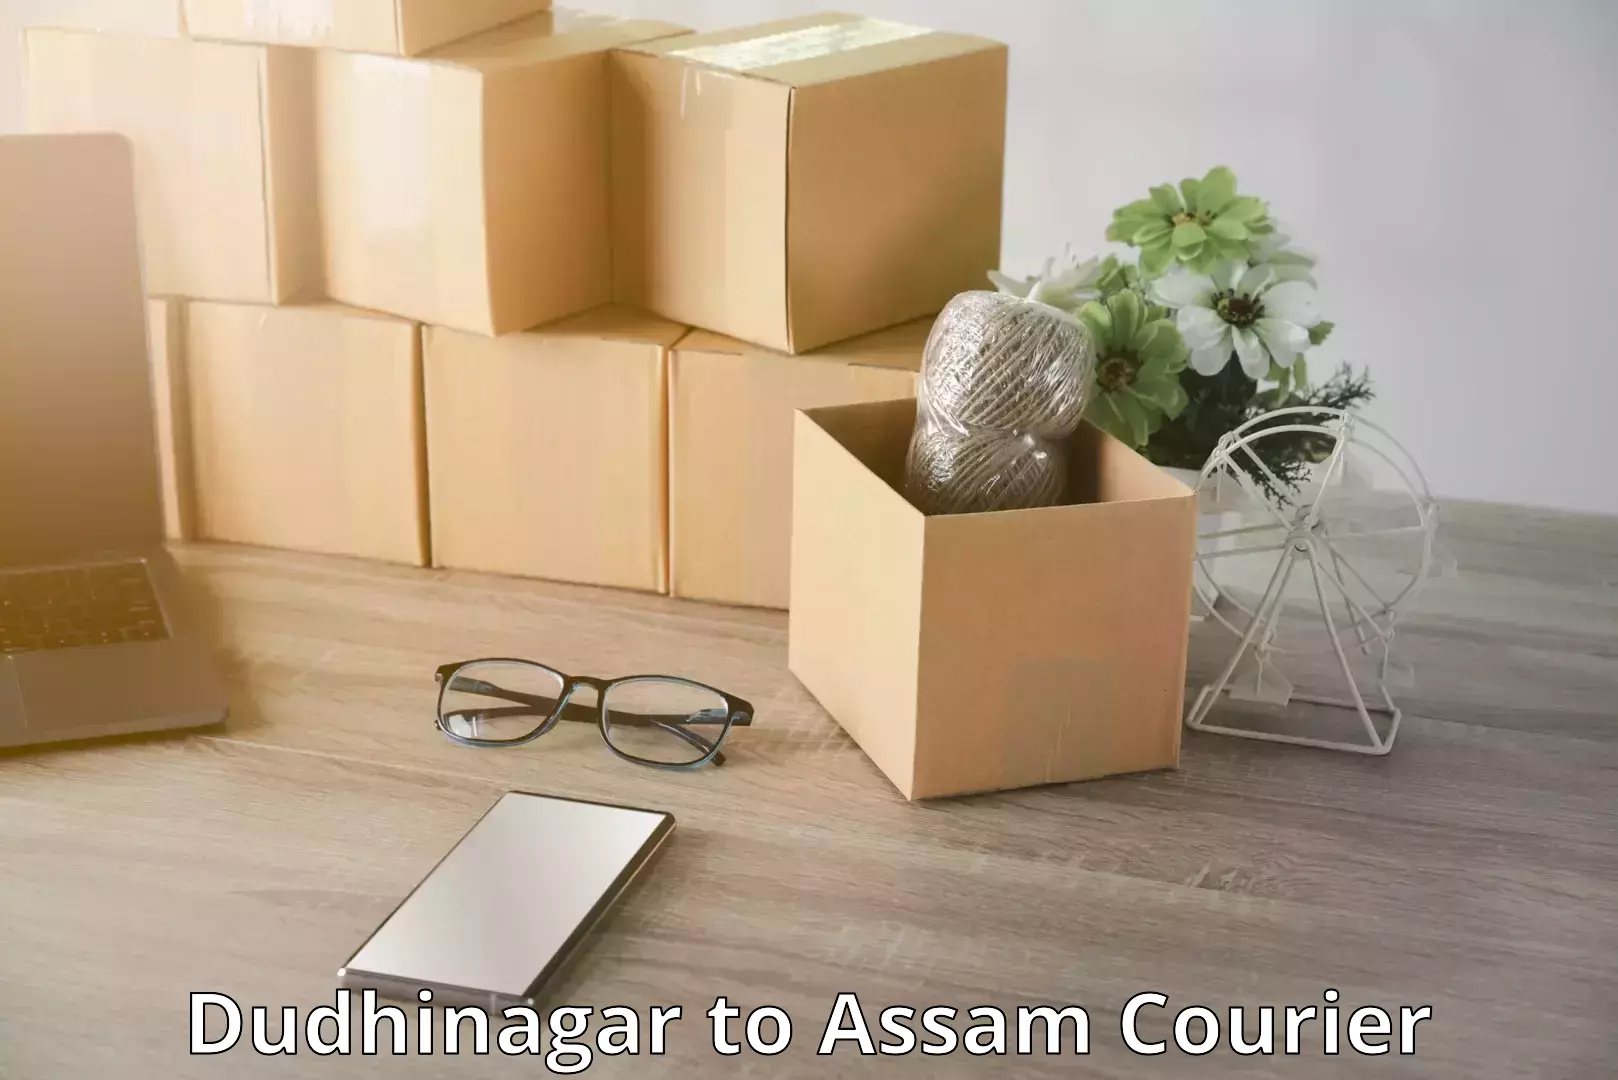 Nationwide luggage courier Dudhinagar to Assam